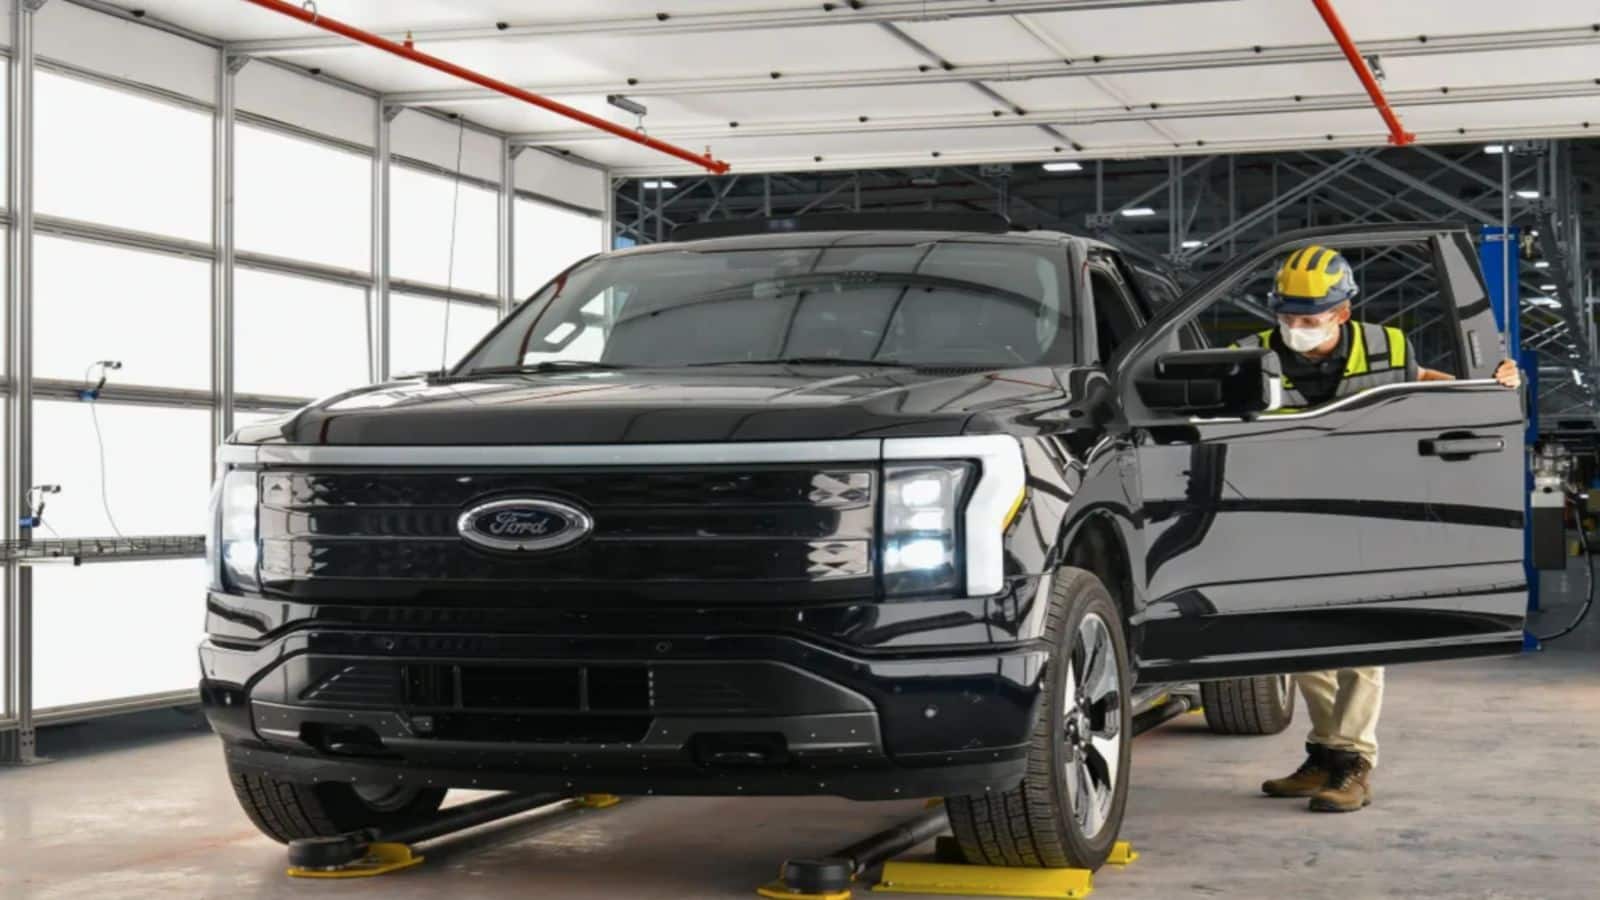 Ford delays production of next-gen electric three-row SUV to 2027